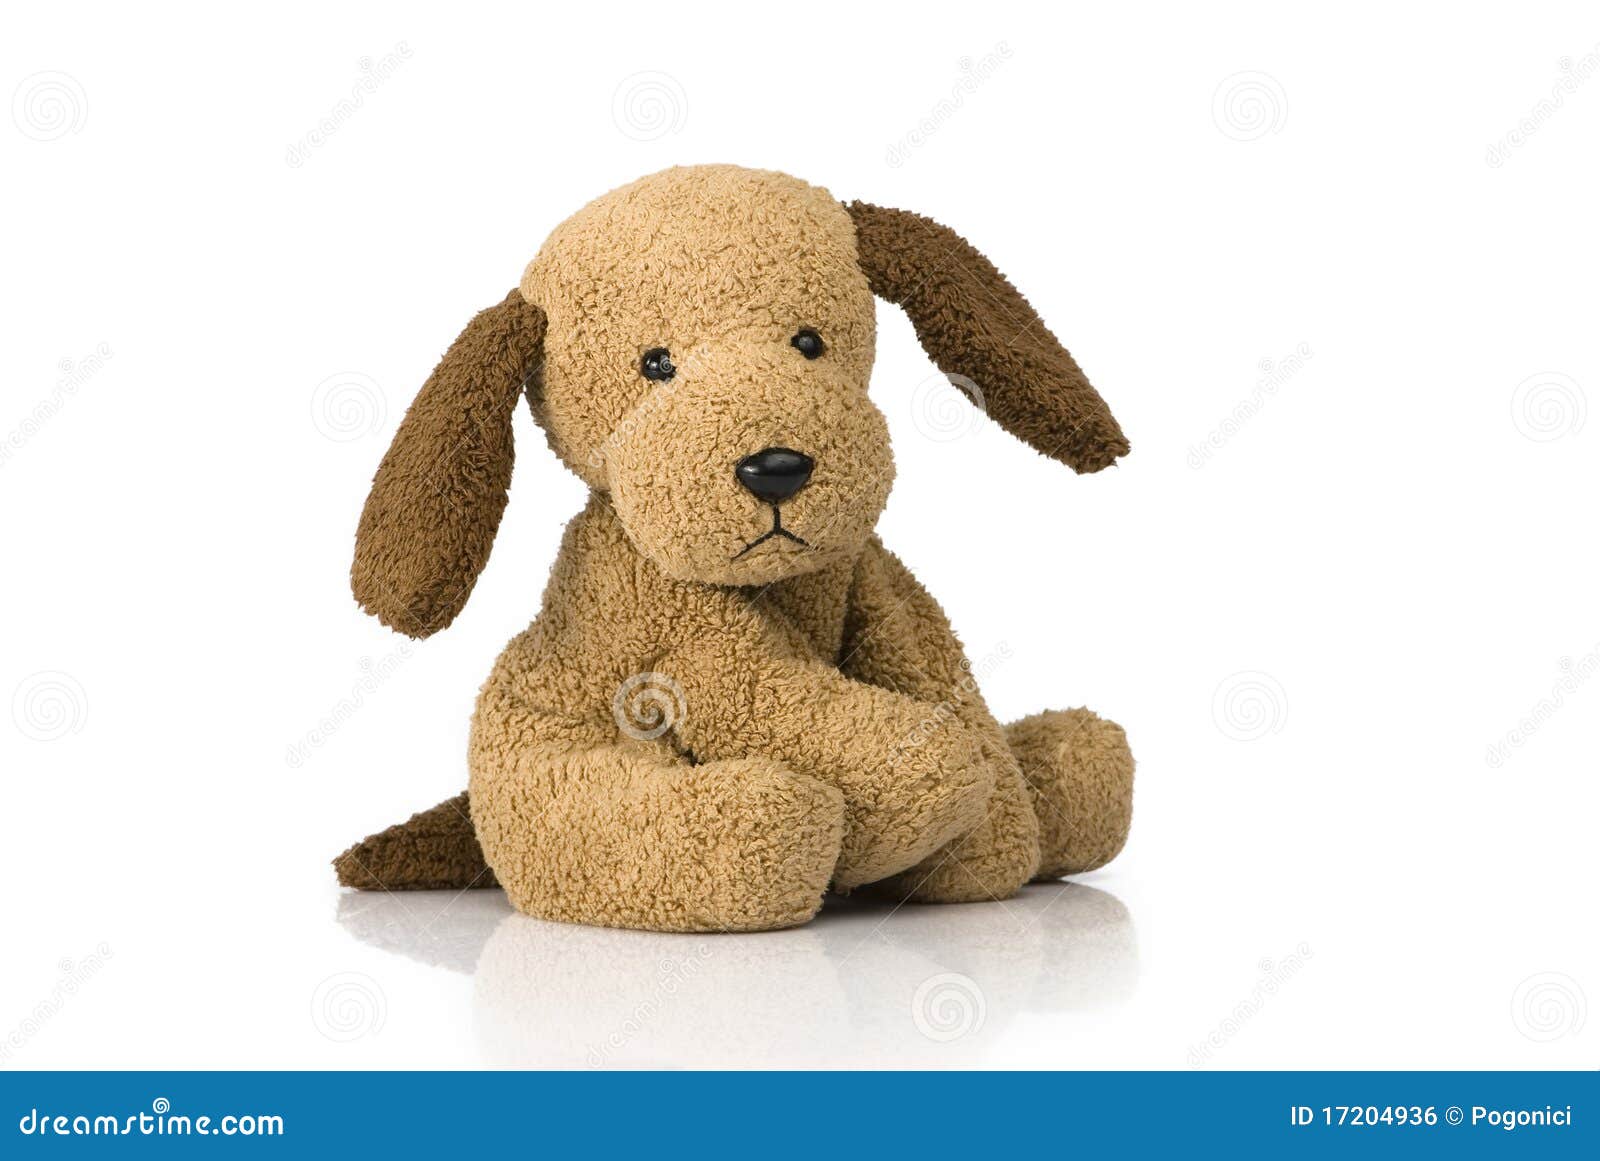 Cute Puppy Toy Royalty Free Stock Image - Image: 17204936